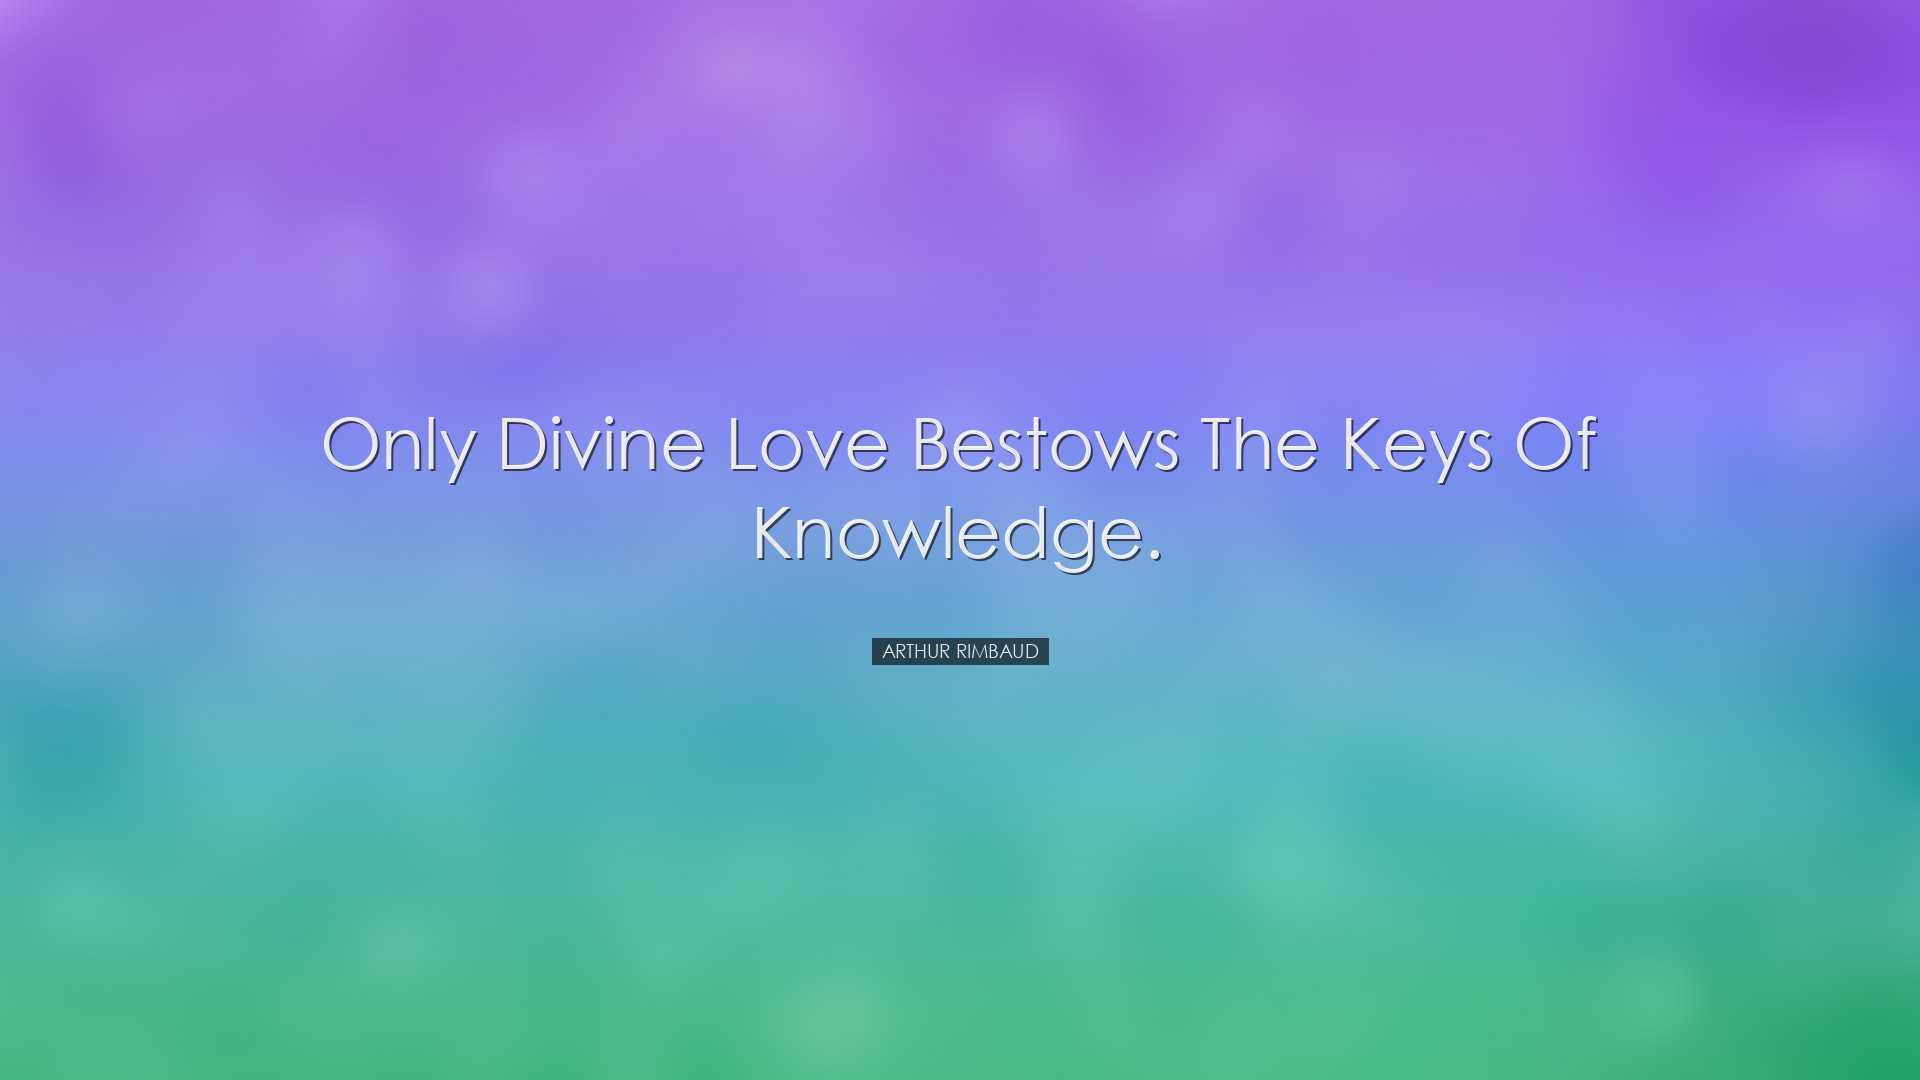 Only divine love bestows the keys of knowledge. - Arthur Rimbaud